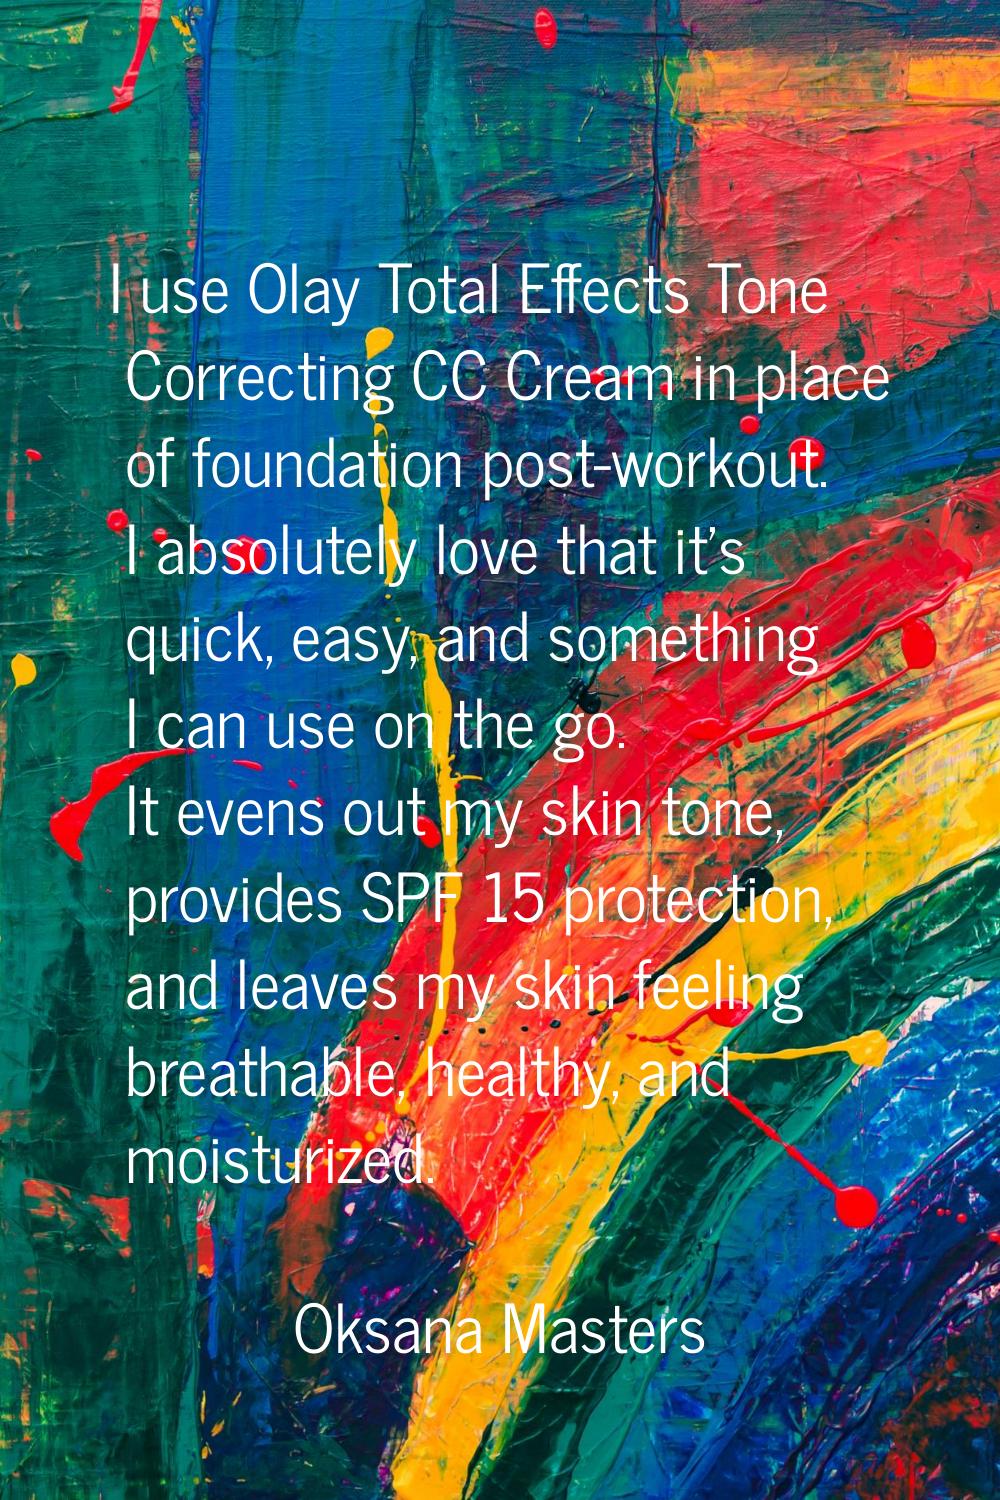 I use Olay Total Effects Tone Correcting CC Cream in place of foundation post-workout. I absolutely